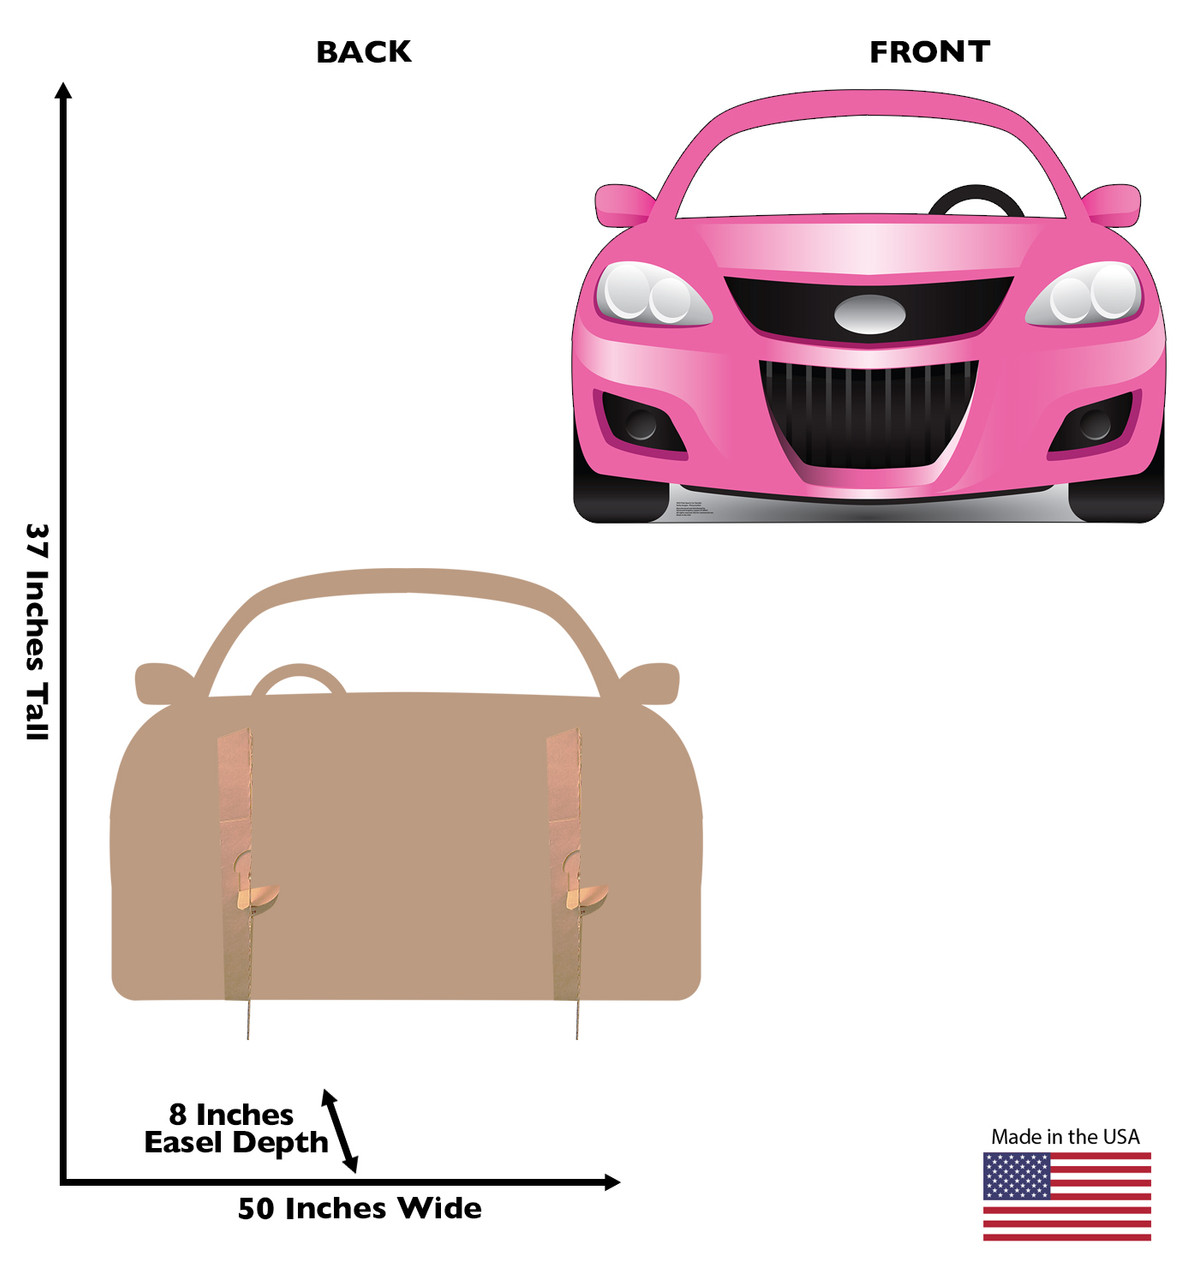 Life-size Cardboard standin of a 3955, pink sports car with back and front dimensions.